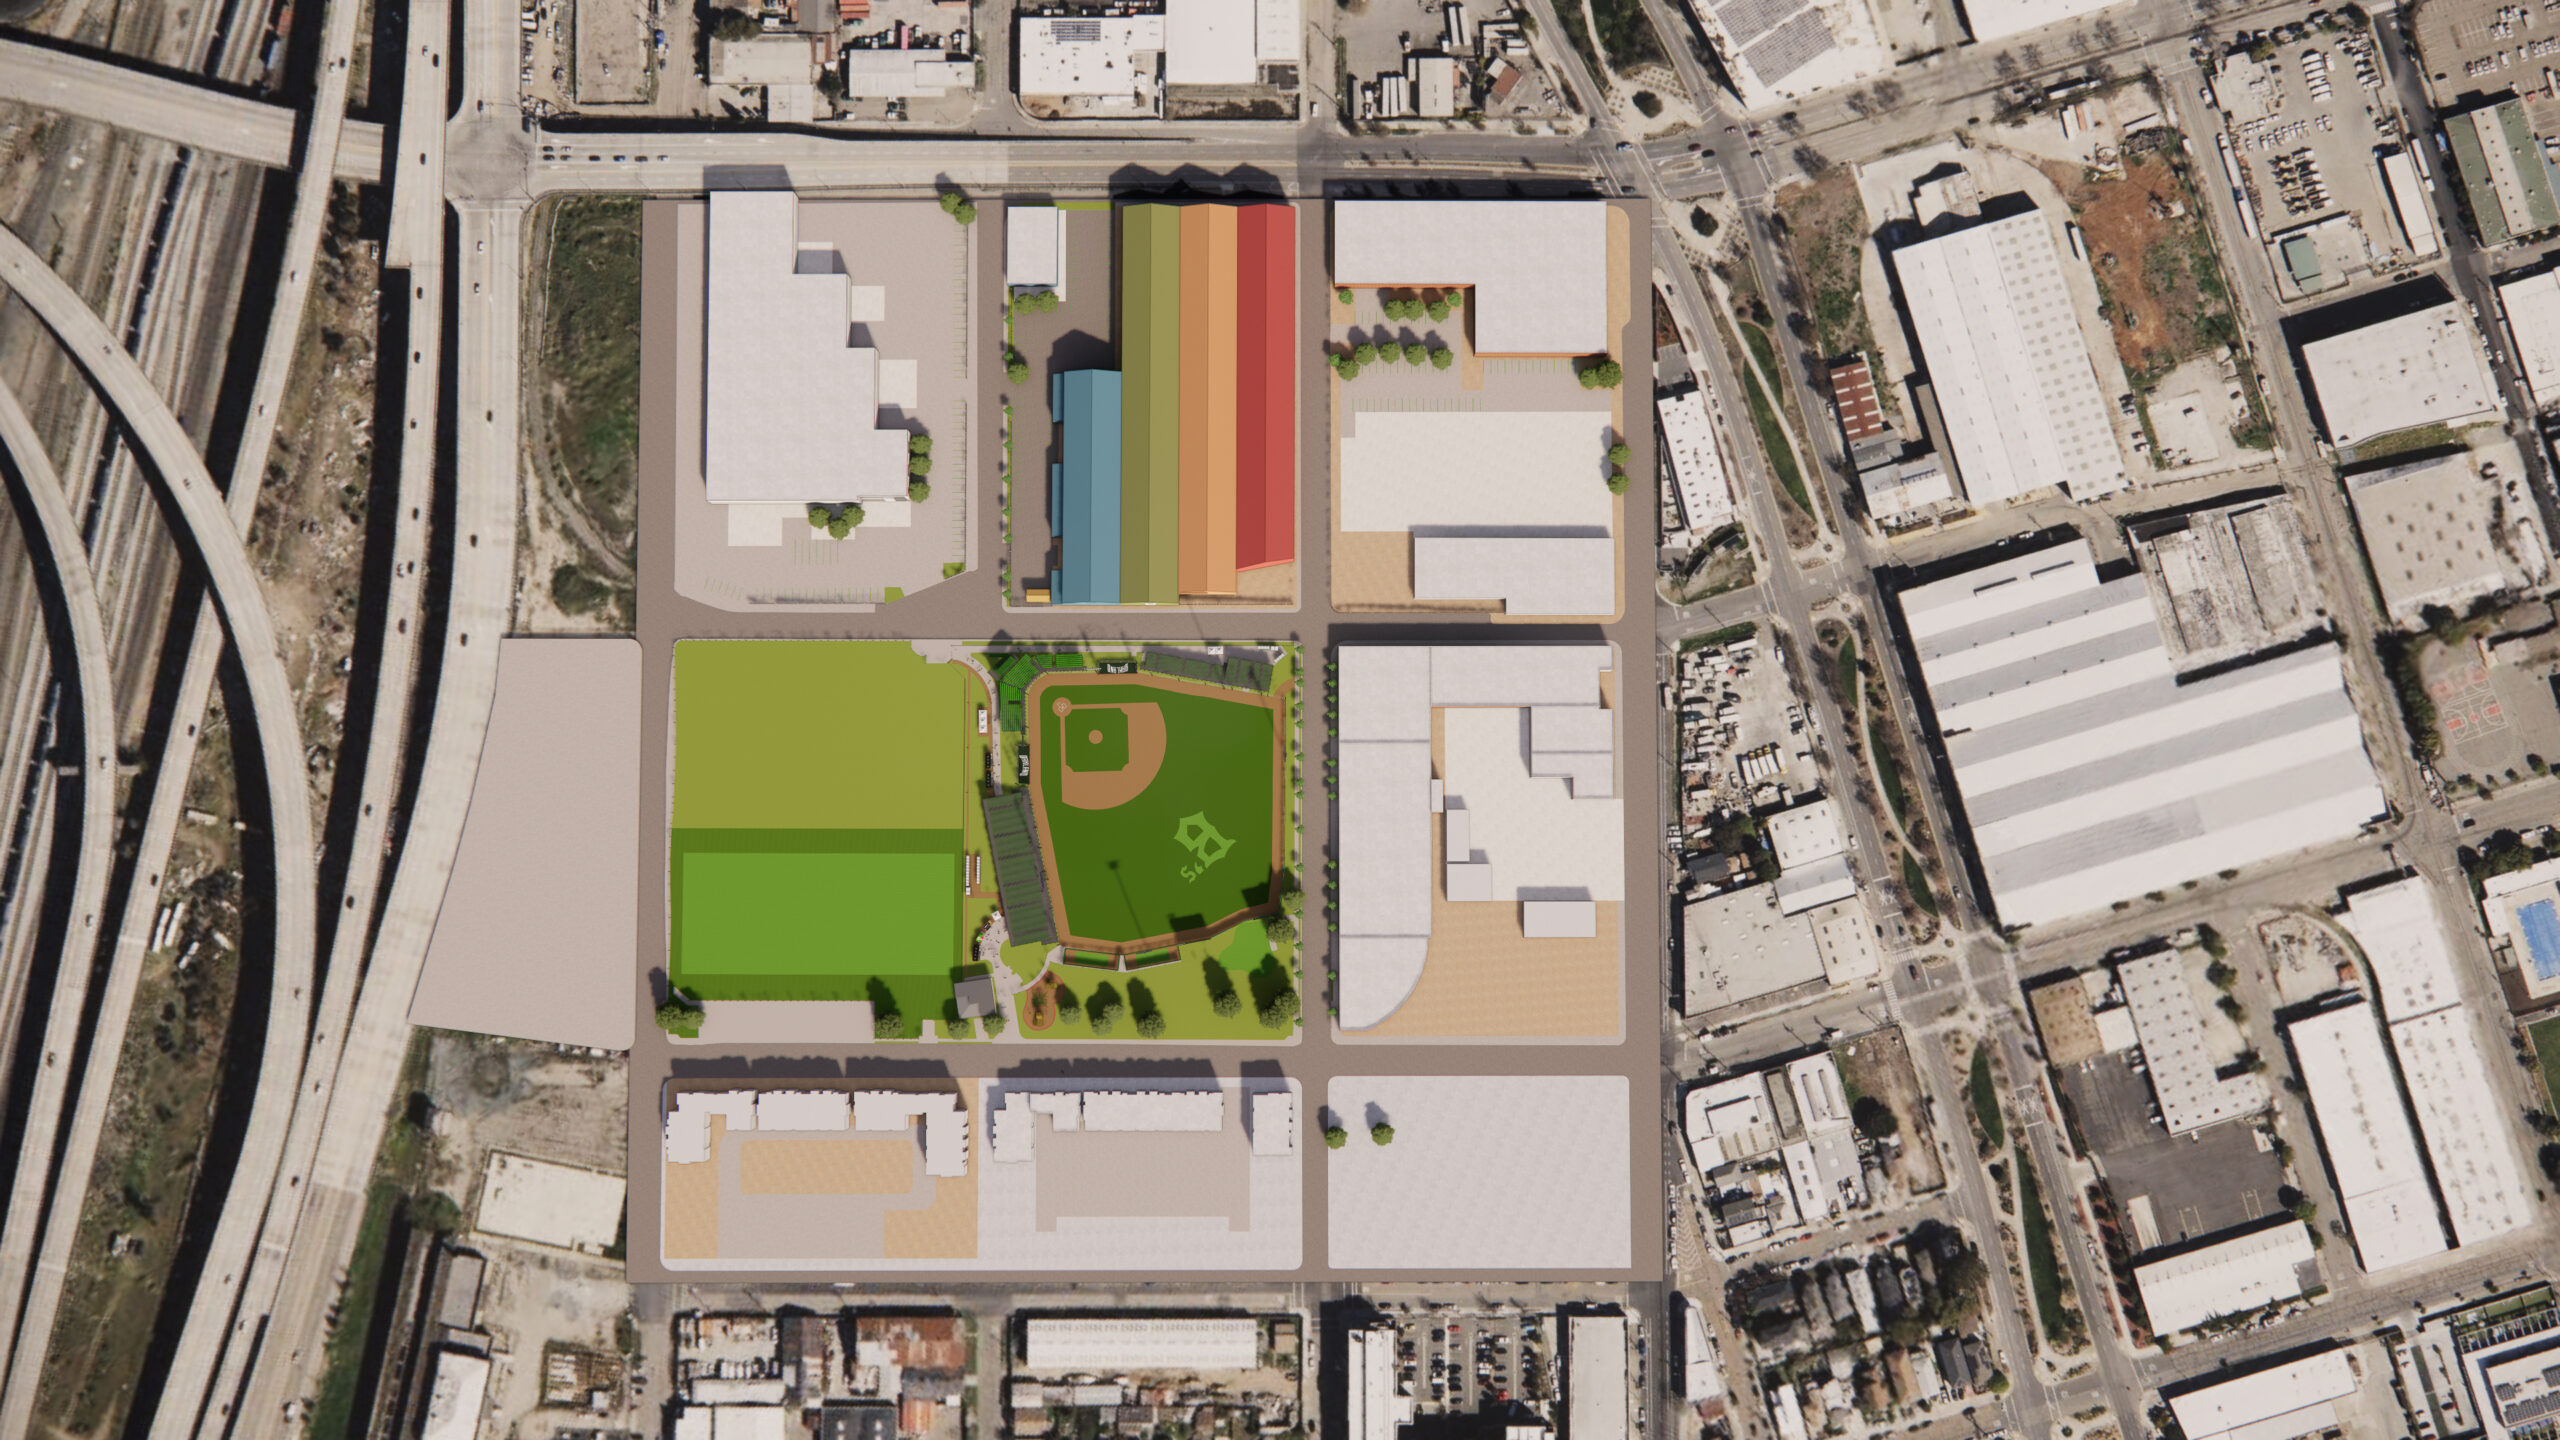 Oakland Ballers Baseball Field site context, rendering by Enscape for Canopy Team